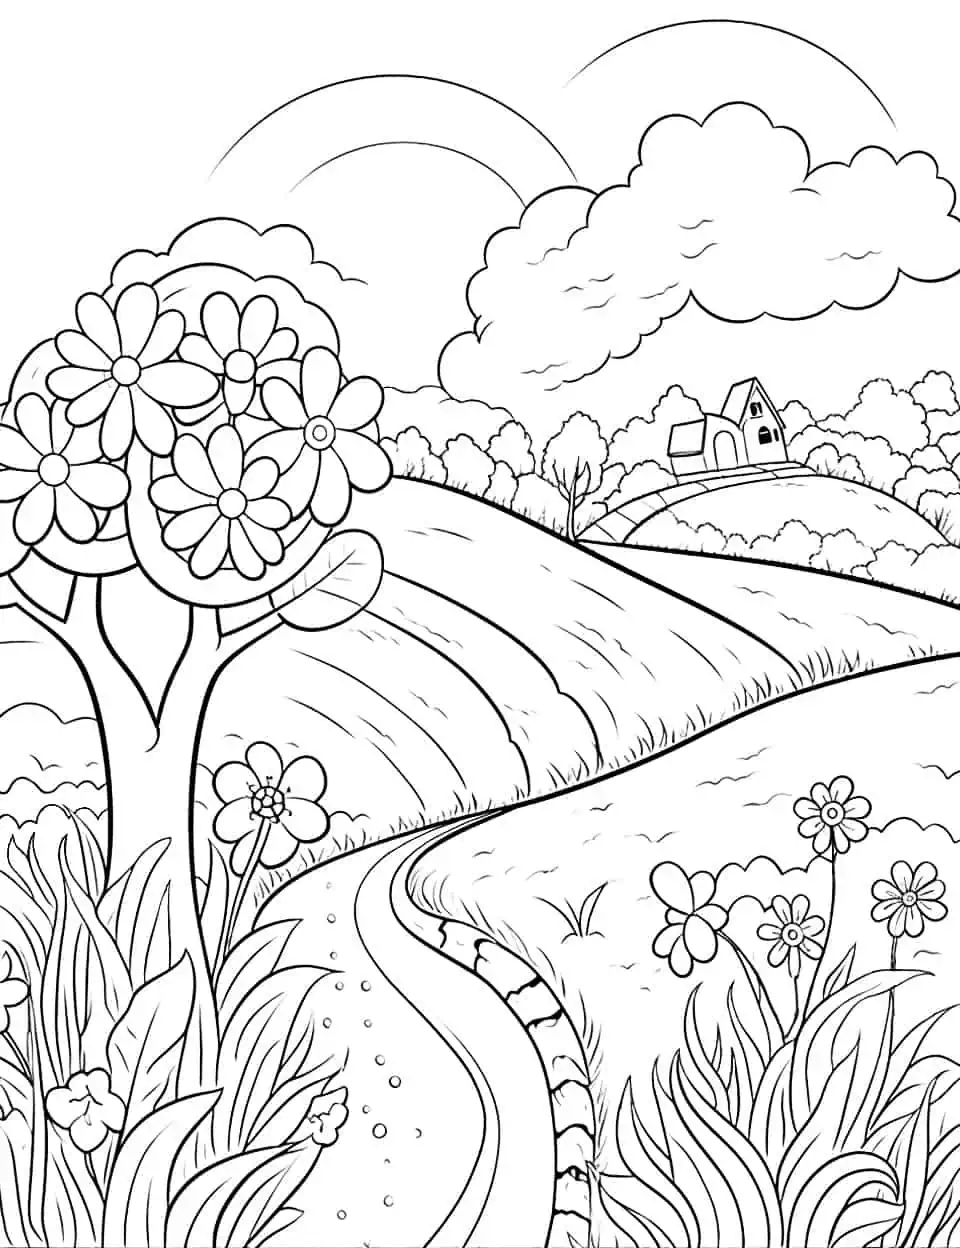 Artistic Spring Landscape Coloring Page - An intricate, artistic landscape of a spring scene, perfect for middle school students.